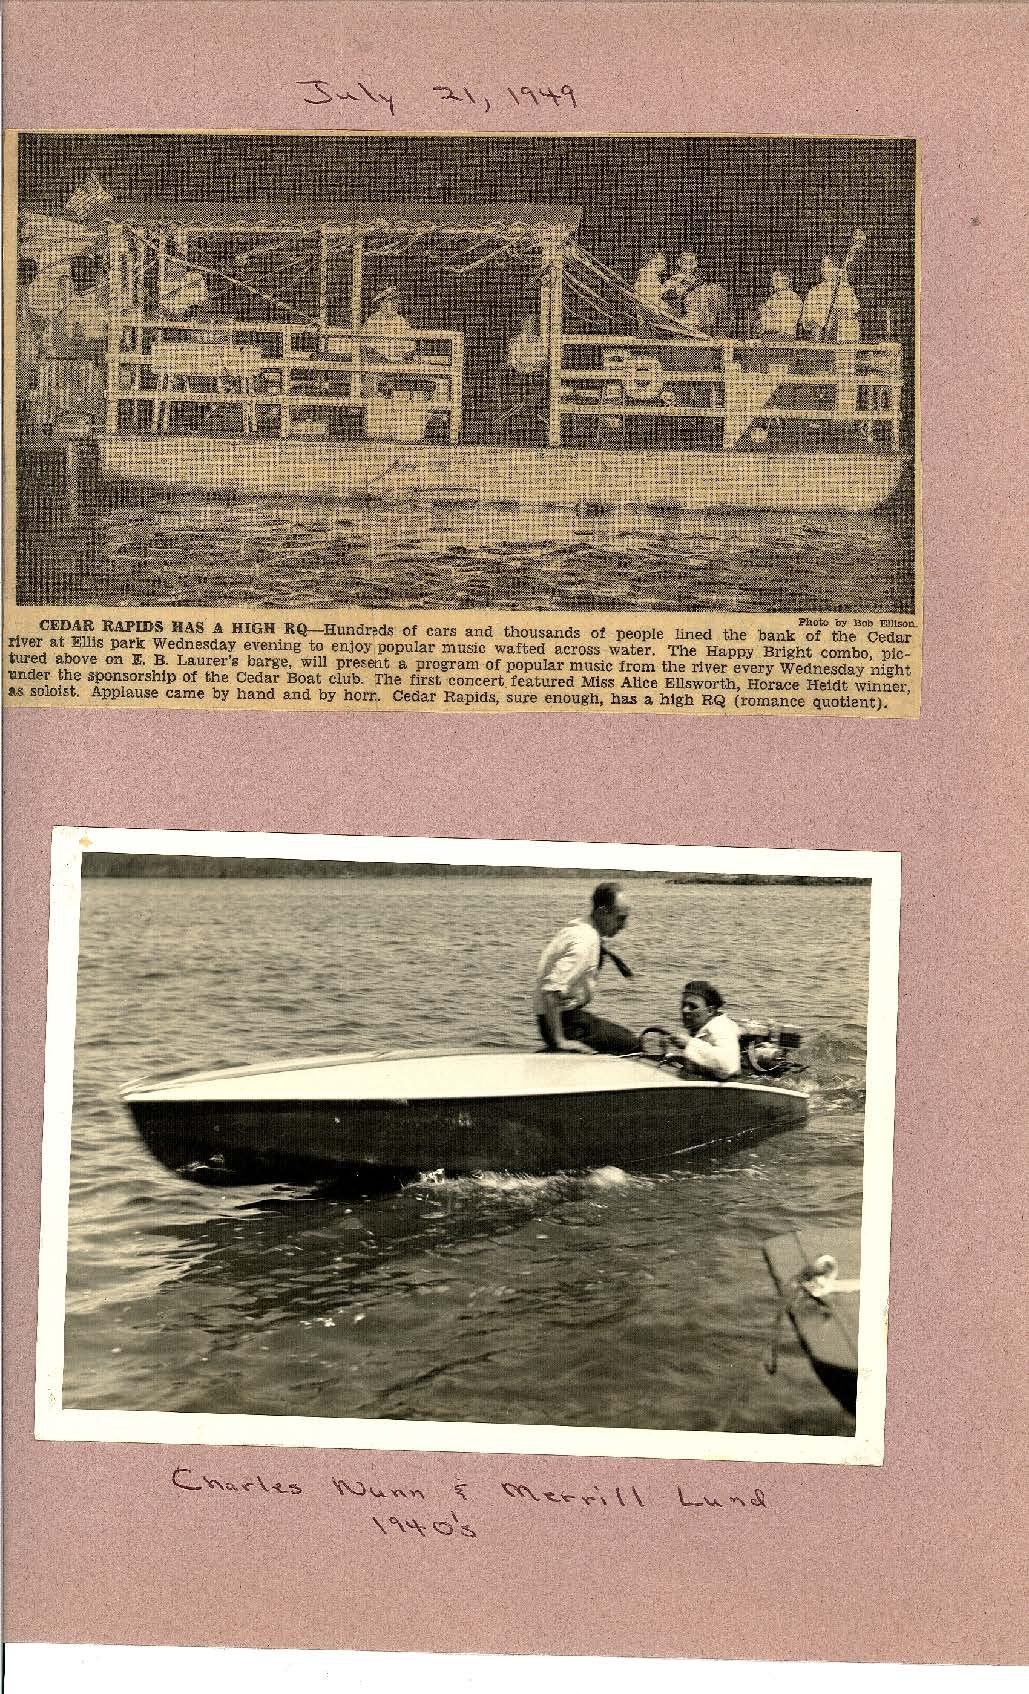 Gazette Photo July 21, 1949 showing band on boat | Photo of Charles Nunn &amp; Merrill Lund 1940's